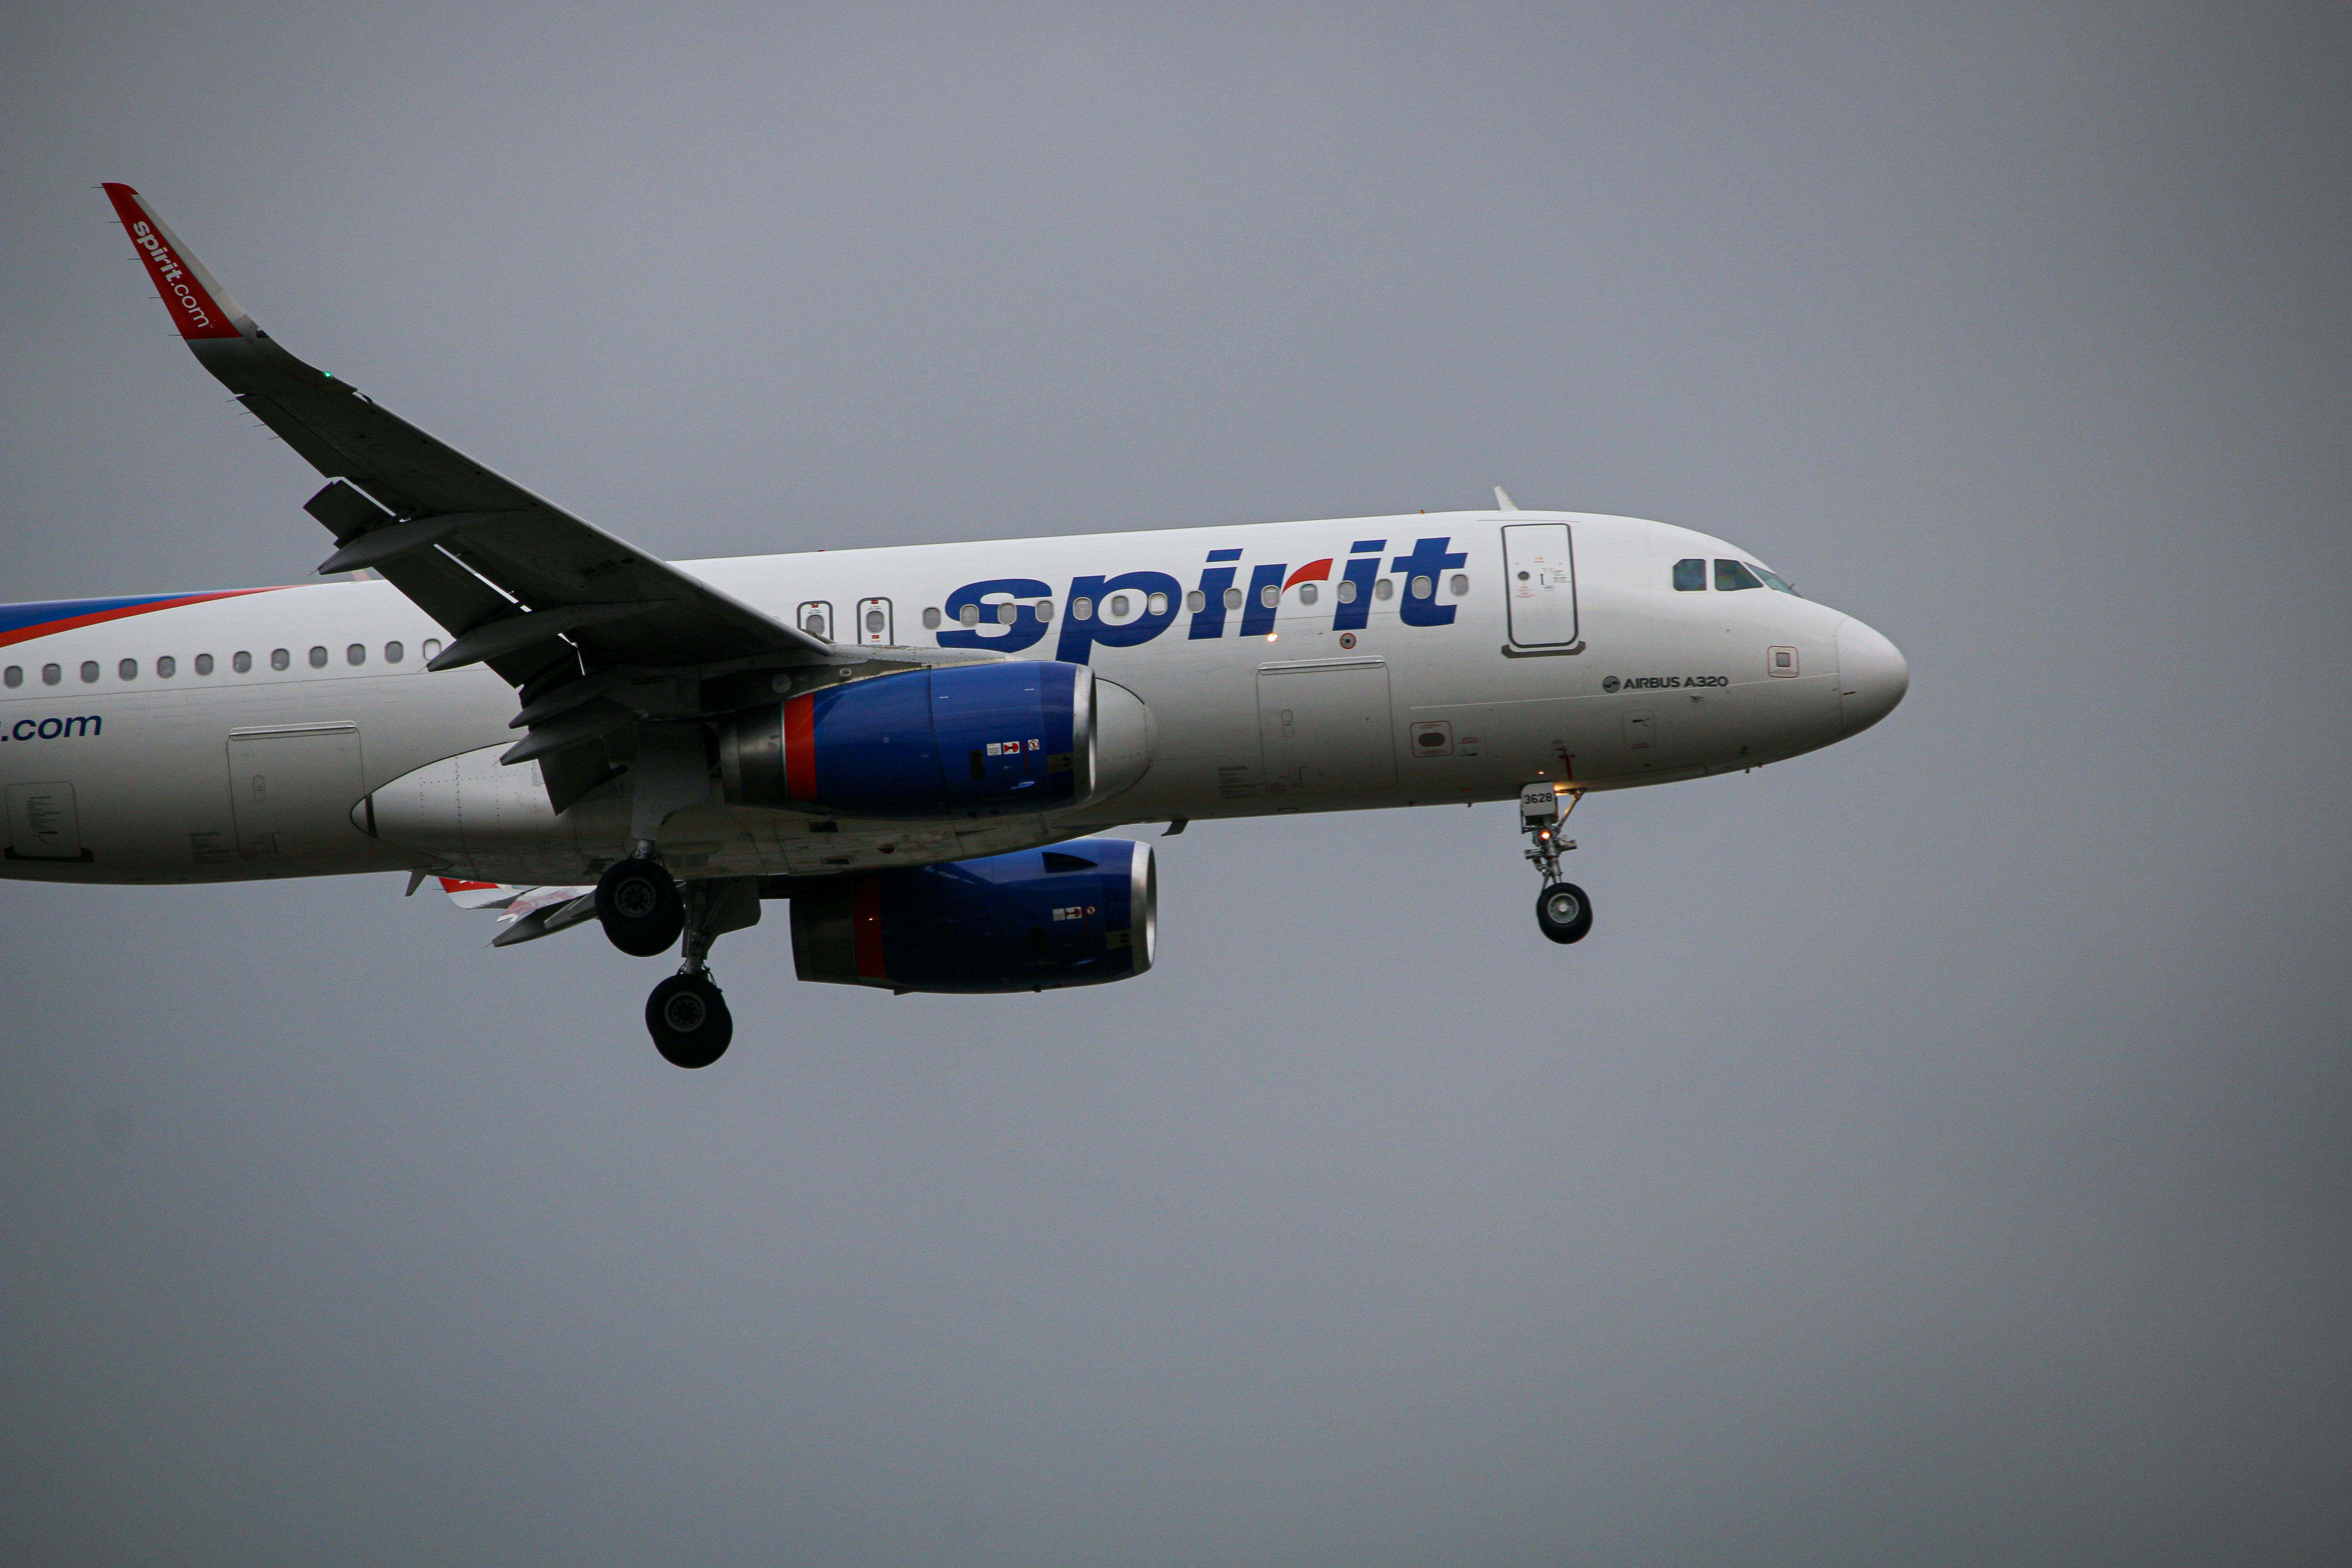 Spirit A320 in their old skittles livery on final for runway 22L.